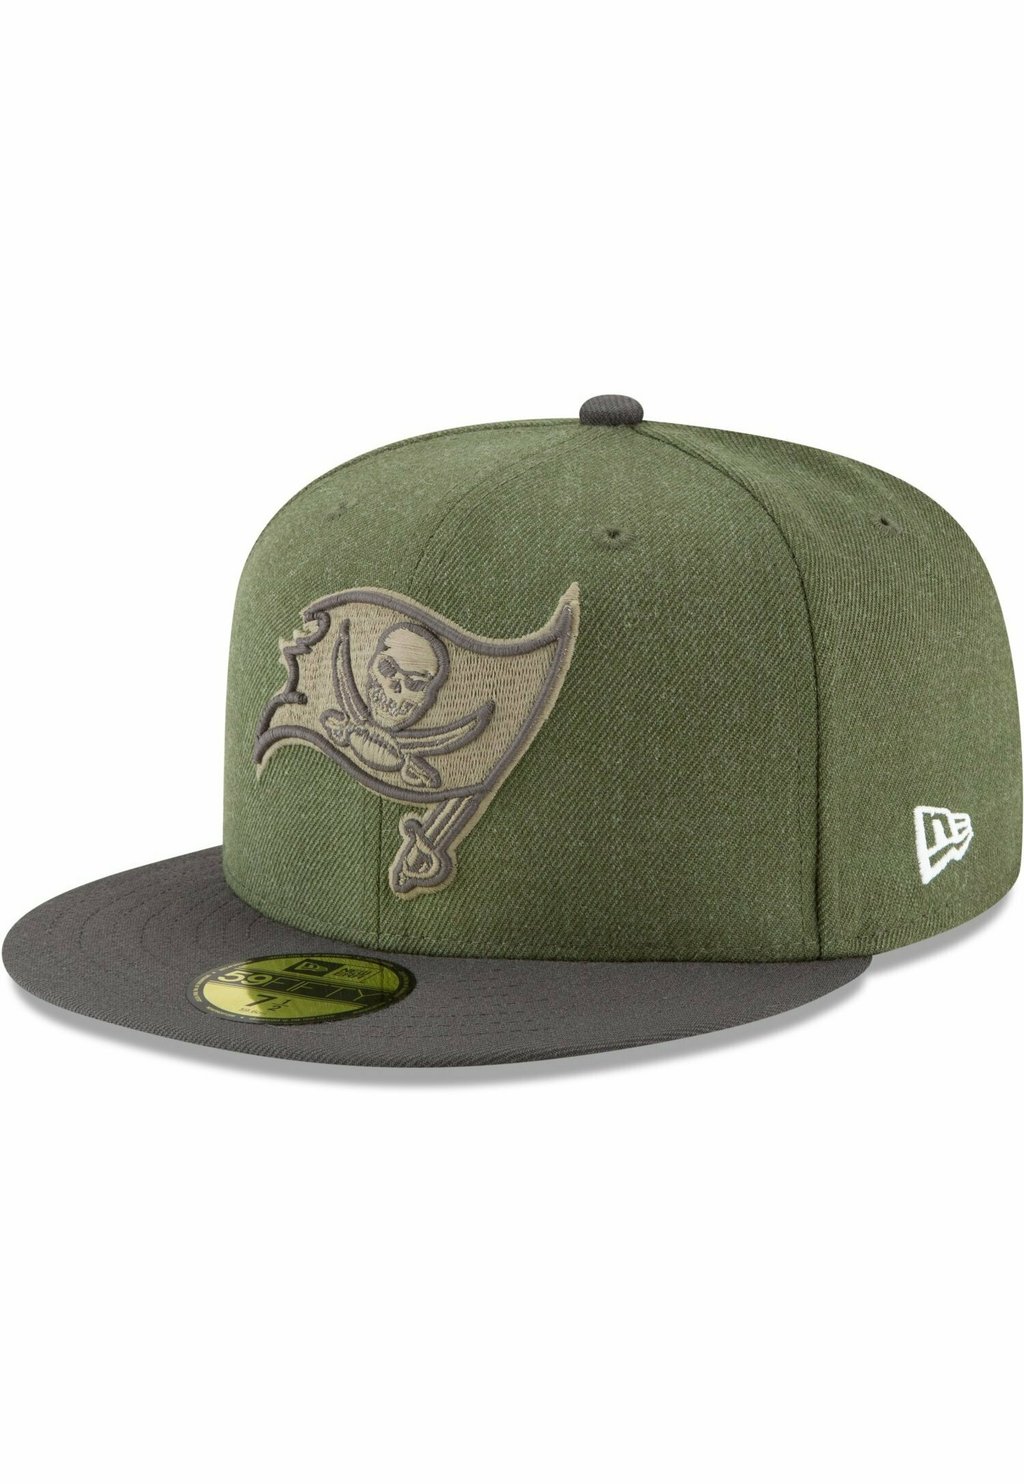 бейсболка 9forty sideline 2023 tampa bay buccaneers new era цвет red olive Бейсболка BAY PACKERS ON FIELD 2018 SALUTE TO SERVICE 59FIFTY New Era, цвет tampa bay buccaneers